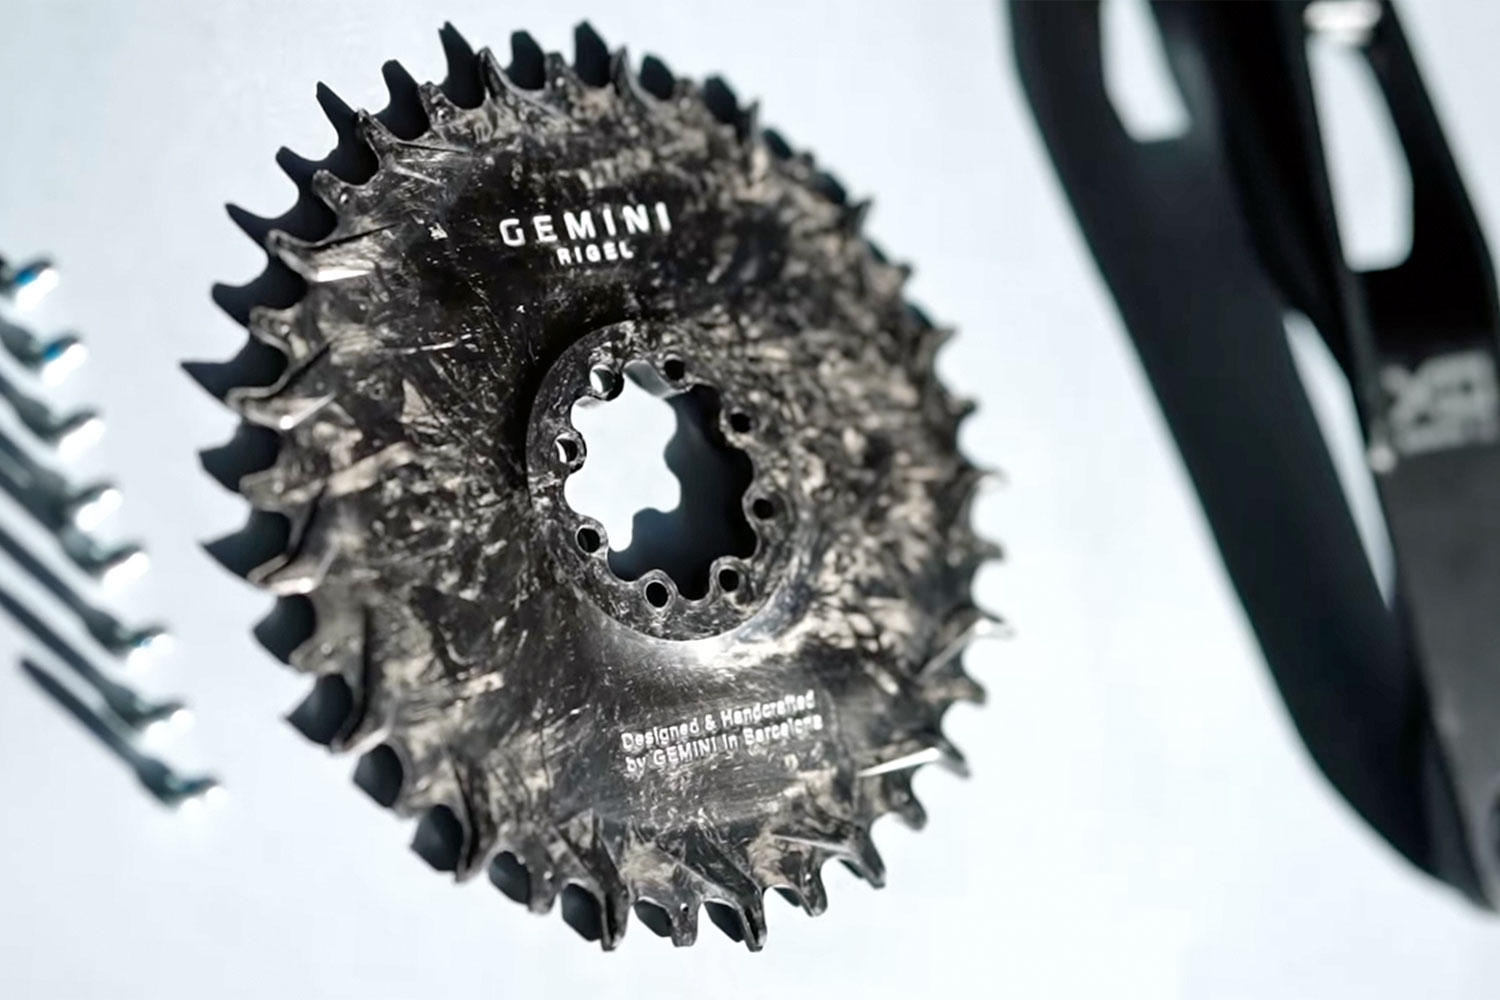 Gemini Rigel ultralight compression molded forged carbon 1x direct mount bike chainrings